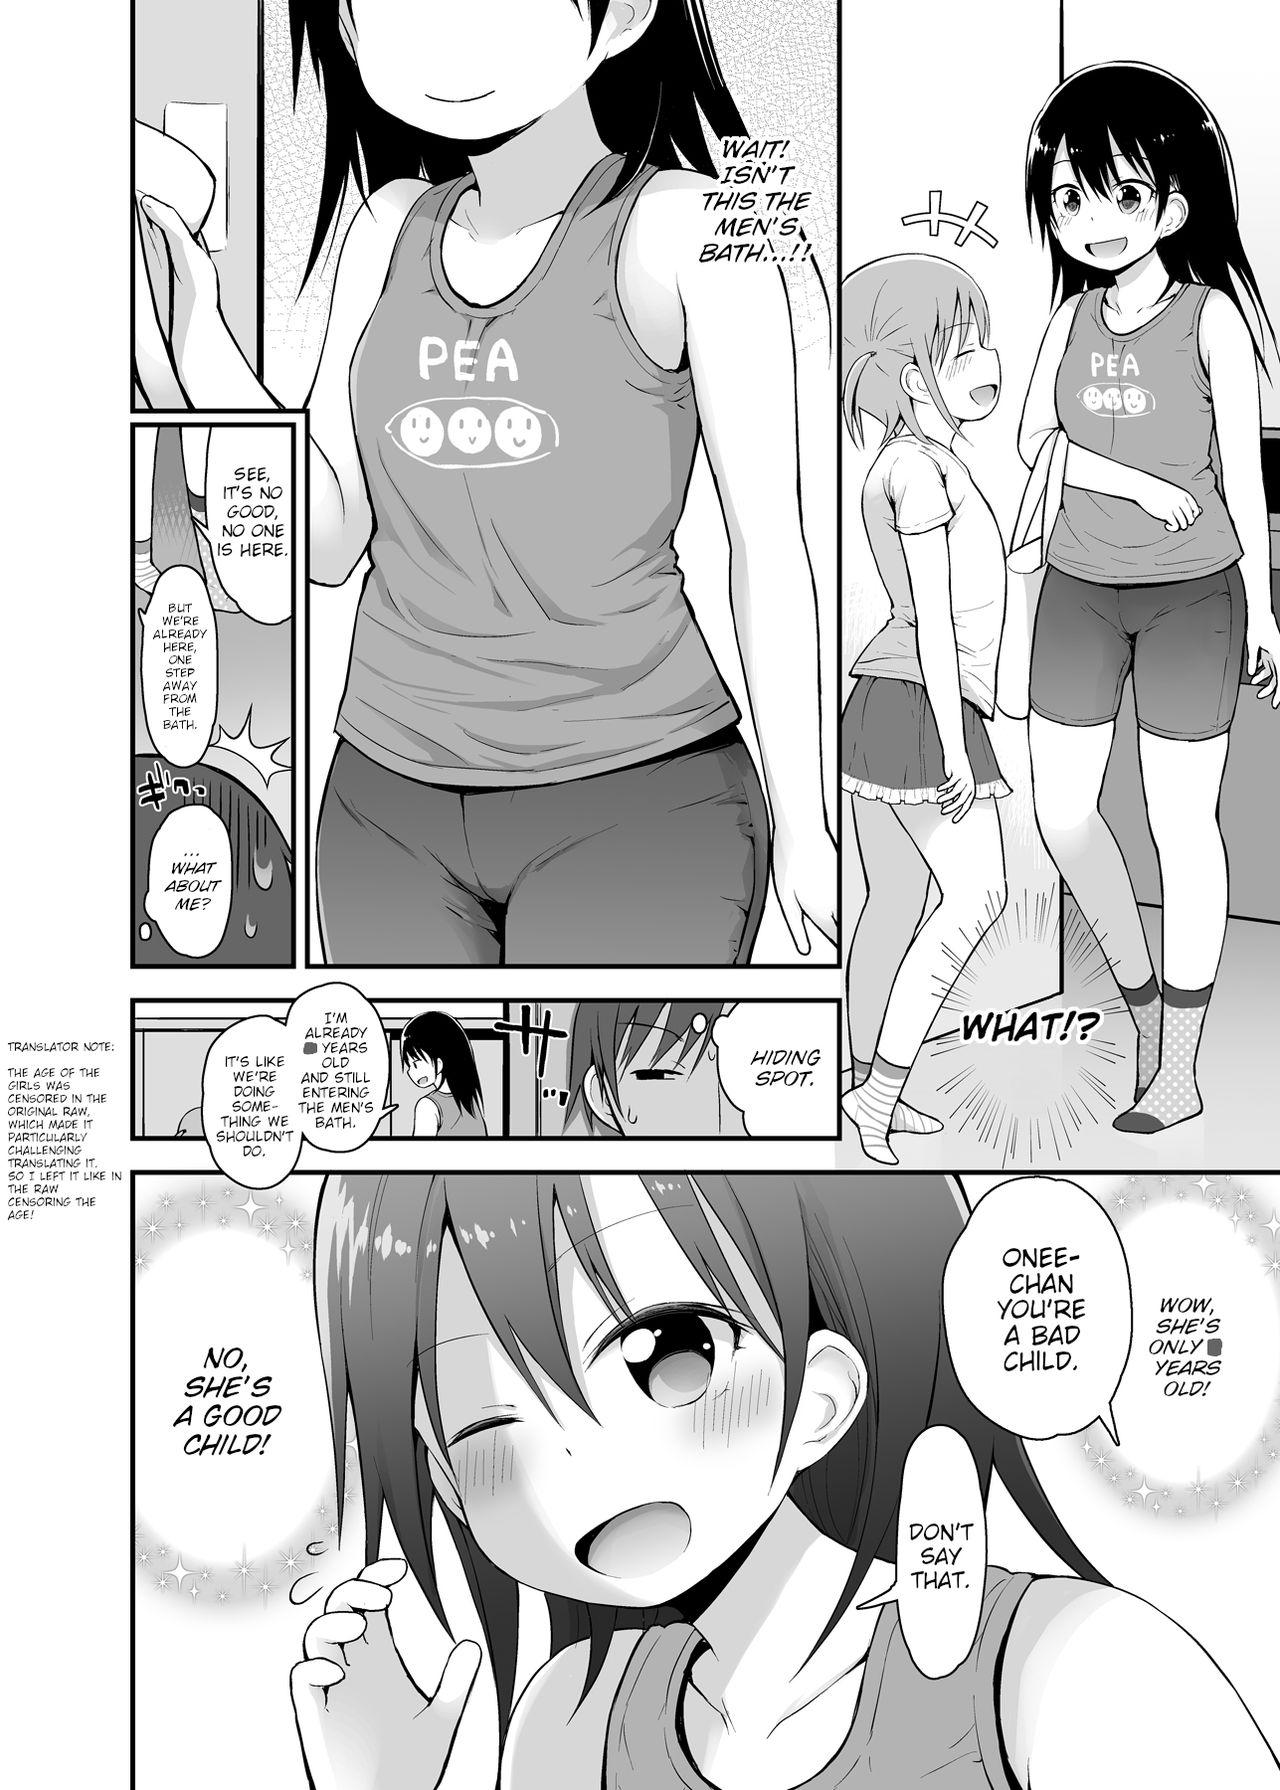 Freak Onnanoko datte Otokoyu ni Hairitai 3 | They may just be little girls, but they still want to enter the men's bath! 3 - Original Gay Cut - Page 3